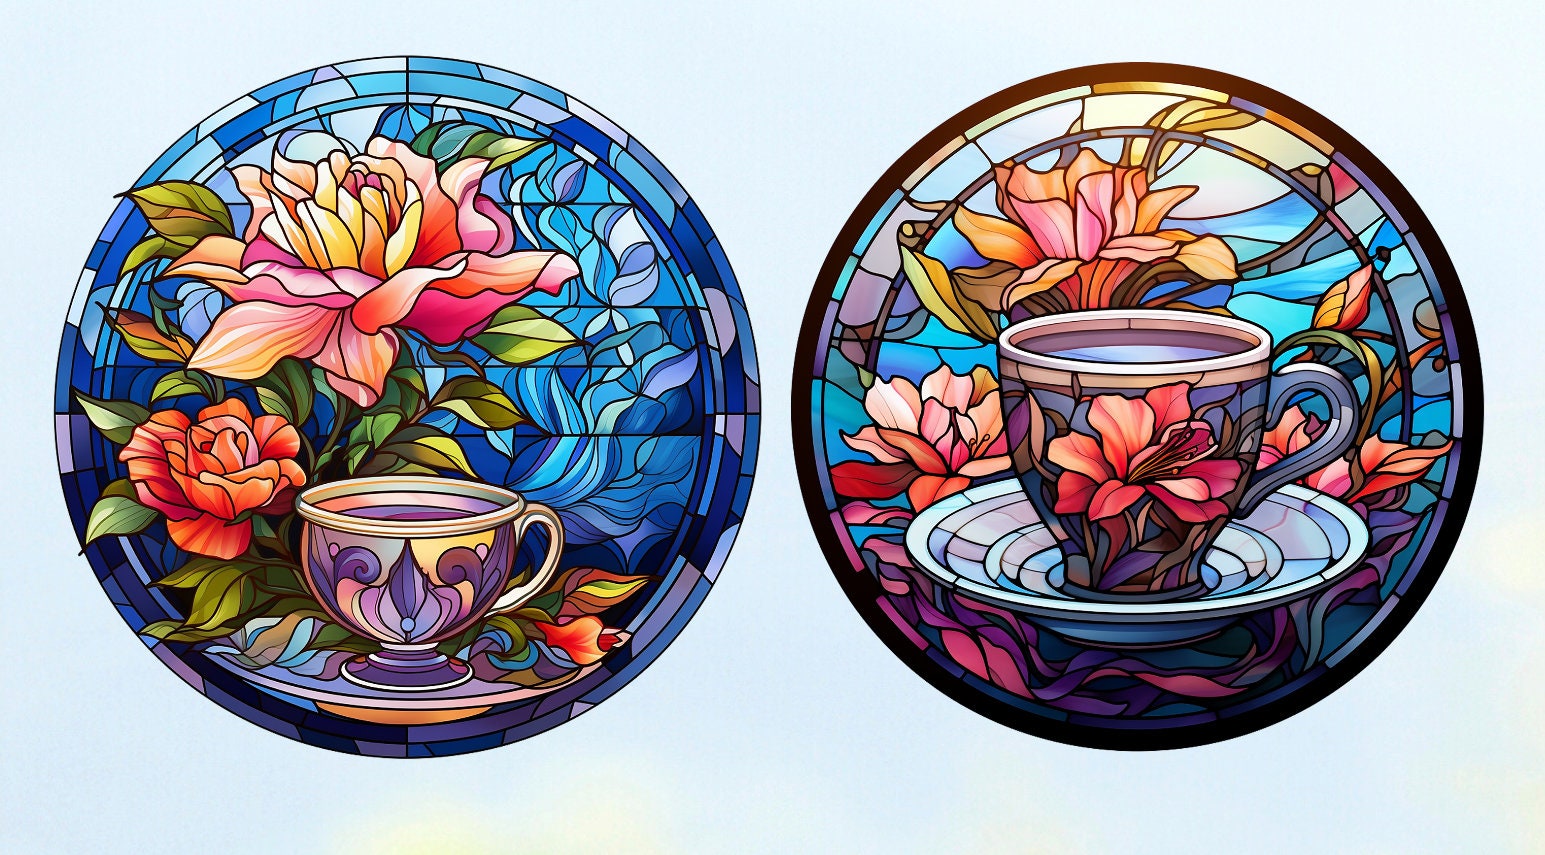 Teacup & Flowers Faux Stained Glass WINDOW CLING Suncatcher Size 8